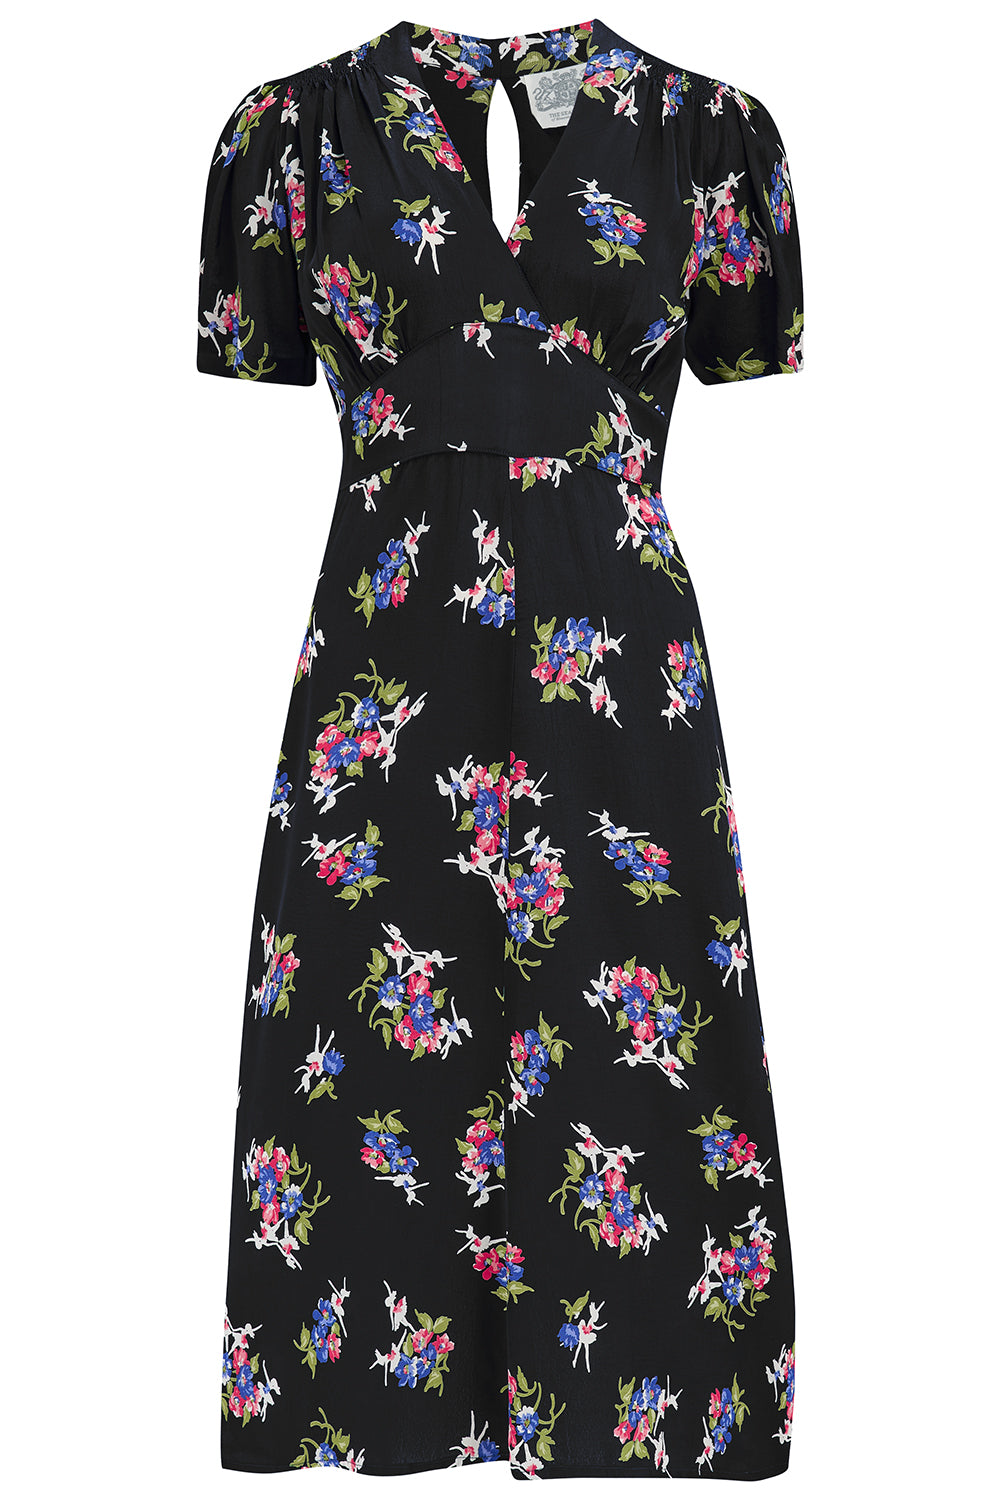 "Dolores" Swing Dress in Black Floral Dancer, A Classic 1940s Inspired Vintage Style